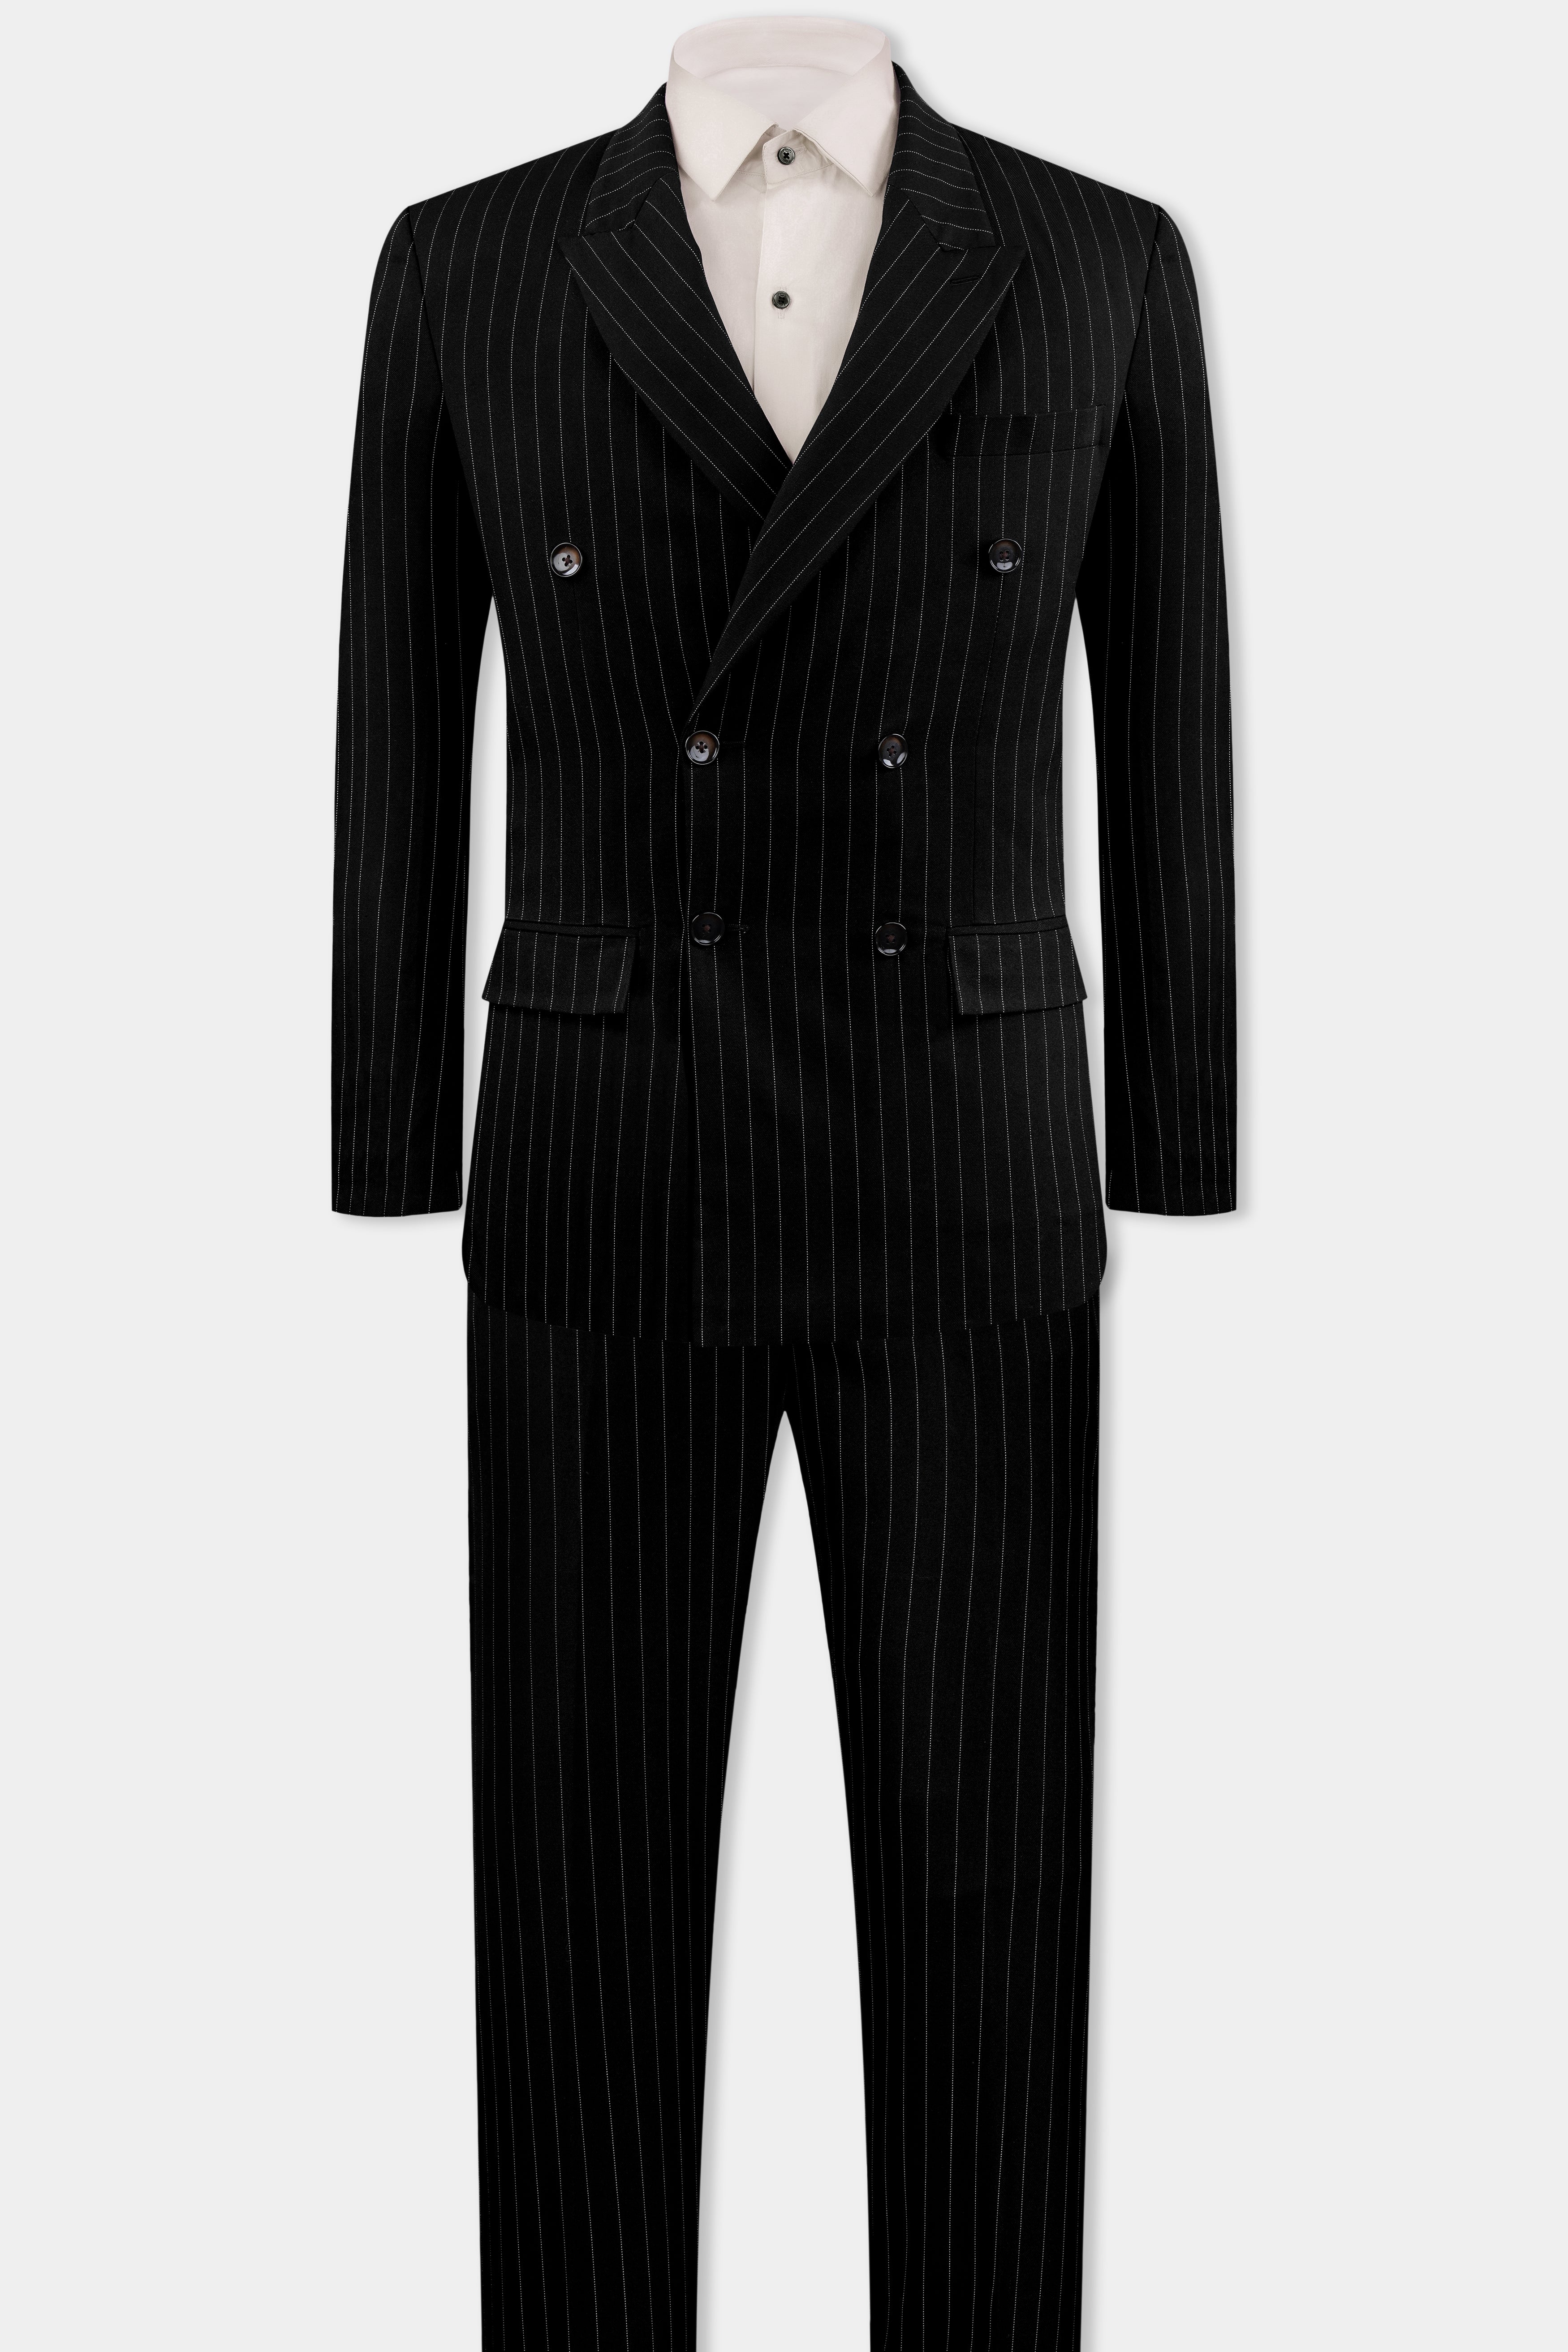 Jade Black and White Pin Striped Wool Rich Double Breasted Suit ST3123-DB-36, ST3123-DB-38, ST3123-DB-40, ST3123-DB-42, ST3123-DB-44, ST3123-DB-46, ST3123-DB-48, ST3123-DB-50, ST3123-DB-52, ST3123-DB-54, ST3123-DB-56, ST3123-DB-58, ST3123-DB-60